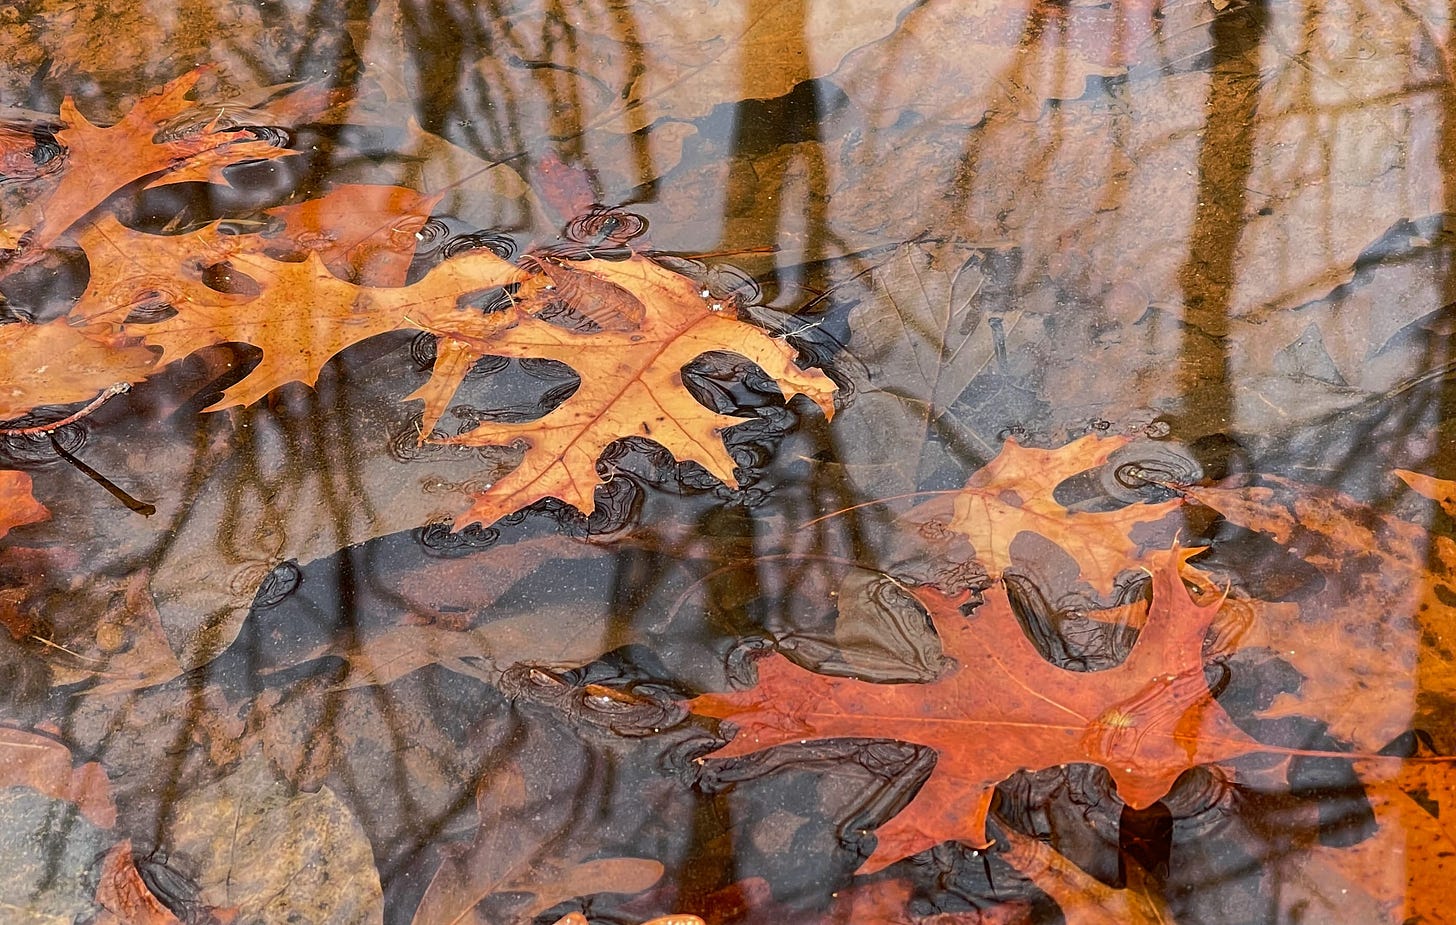 yellow and orange leaves floating in shallow water with gray leaves under water and trees reflecting on the water